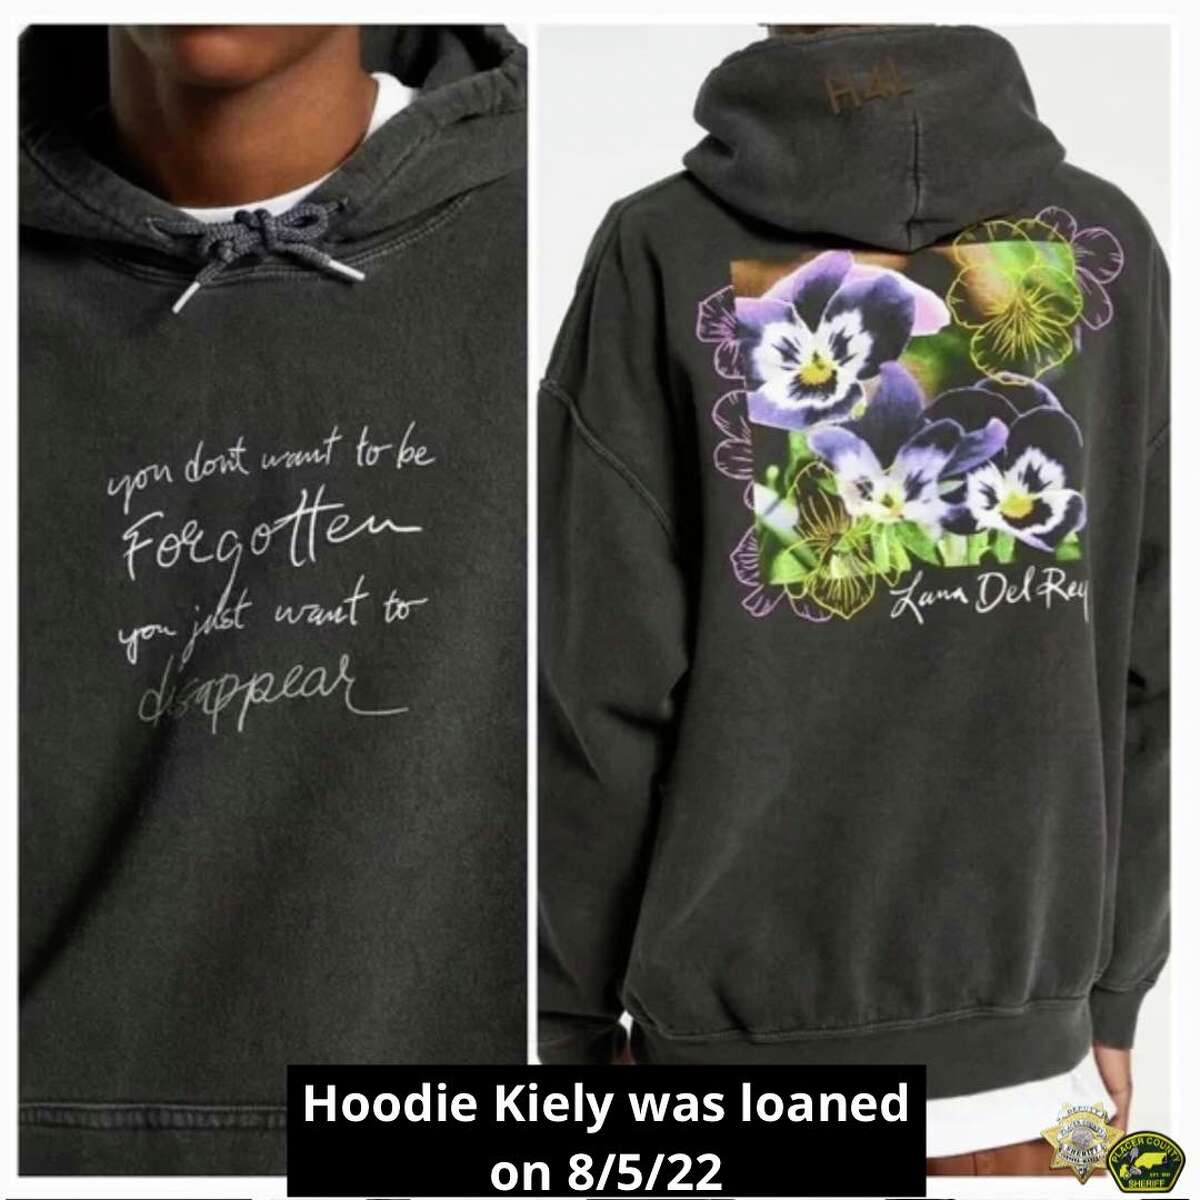 Kiely Rodni was loaned this hoodie by someone at the Prosser campground party, sheriff's deputies say.